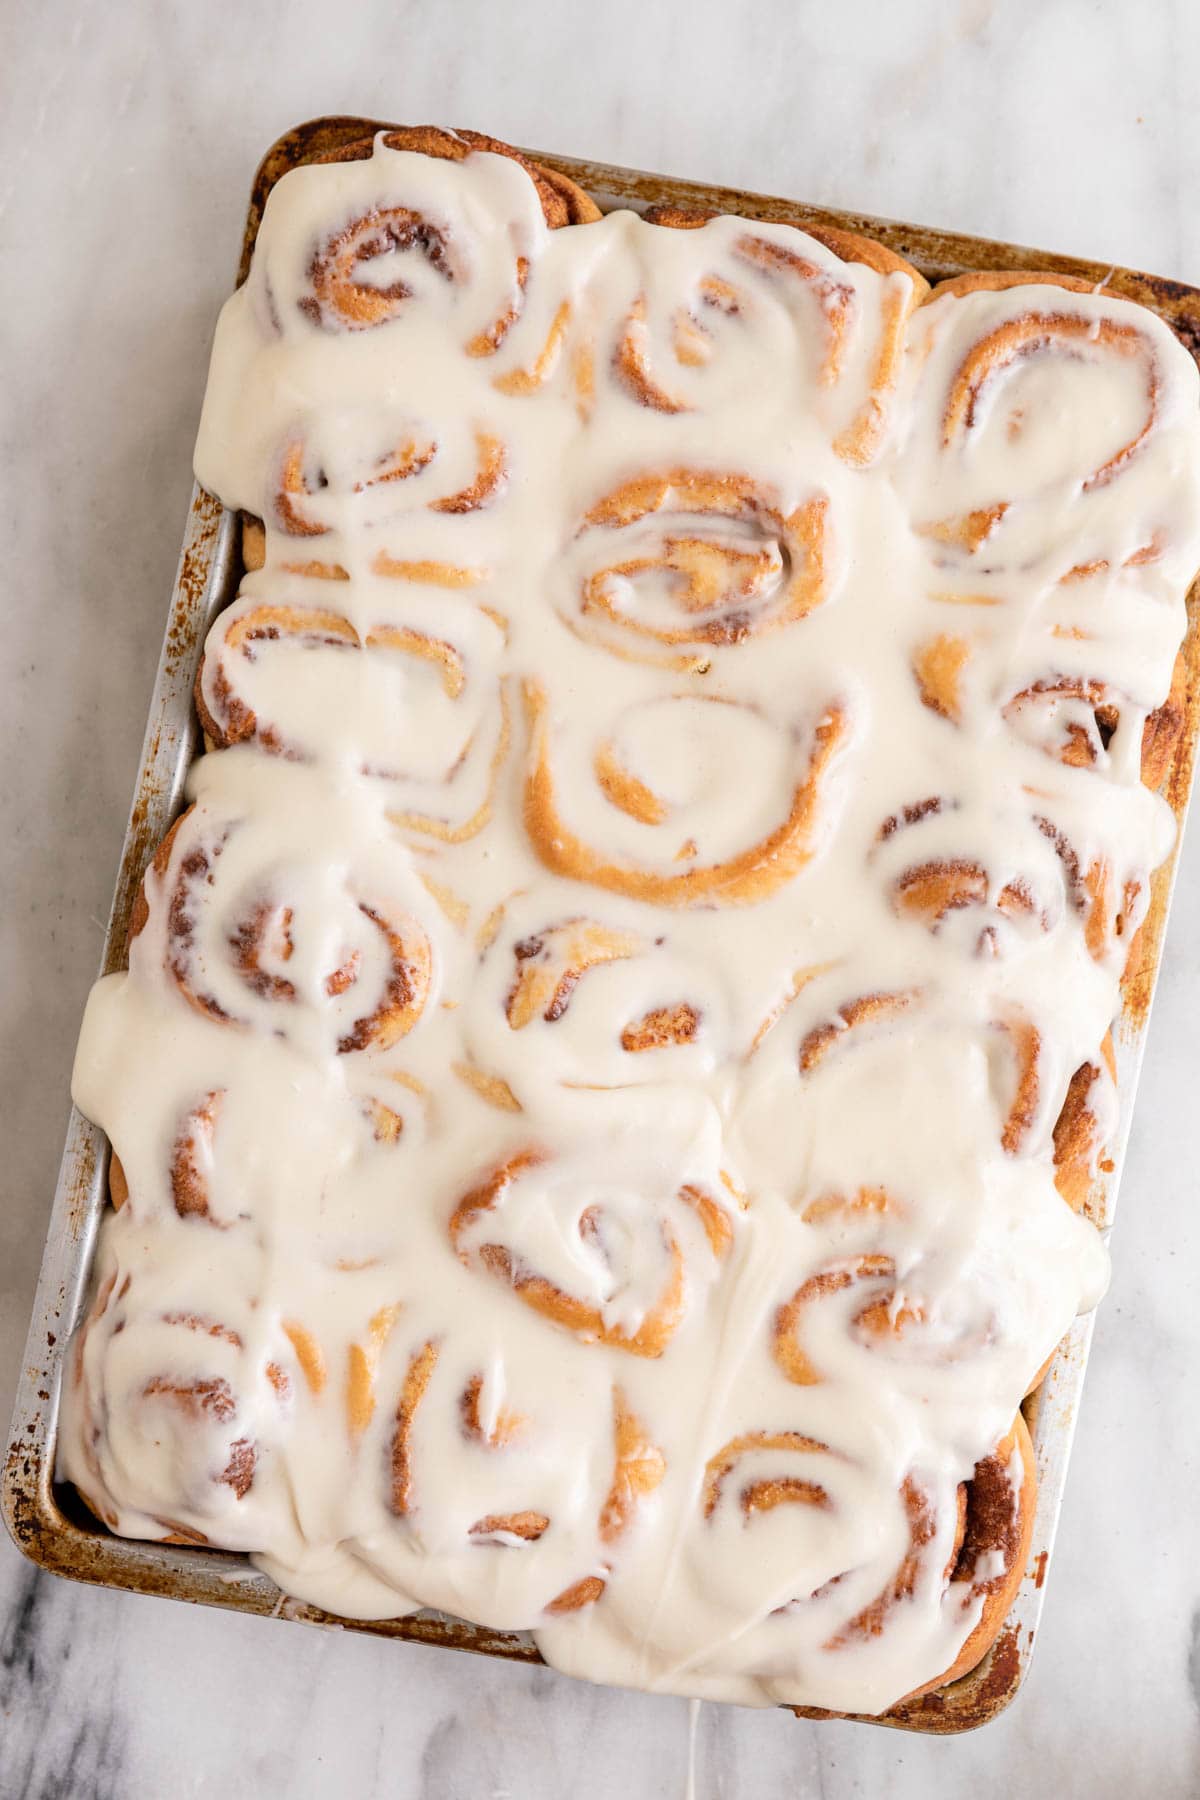 Maple Cinnamon Rolls with icing in baking dish